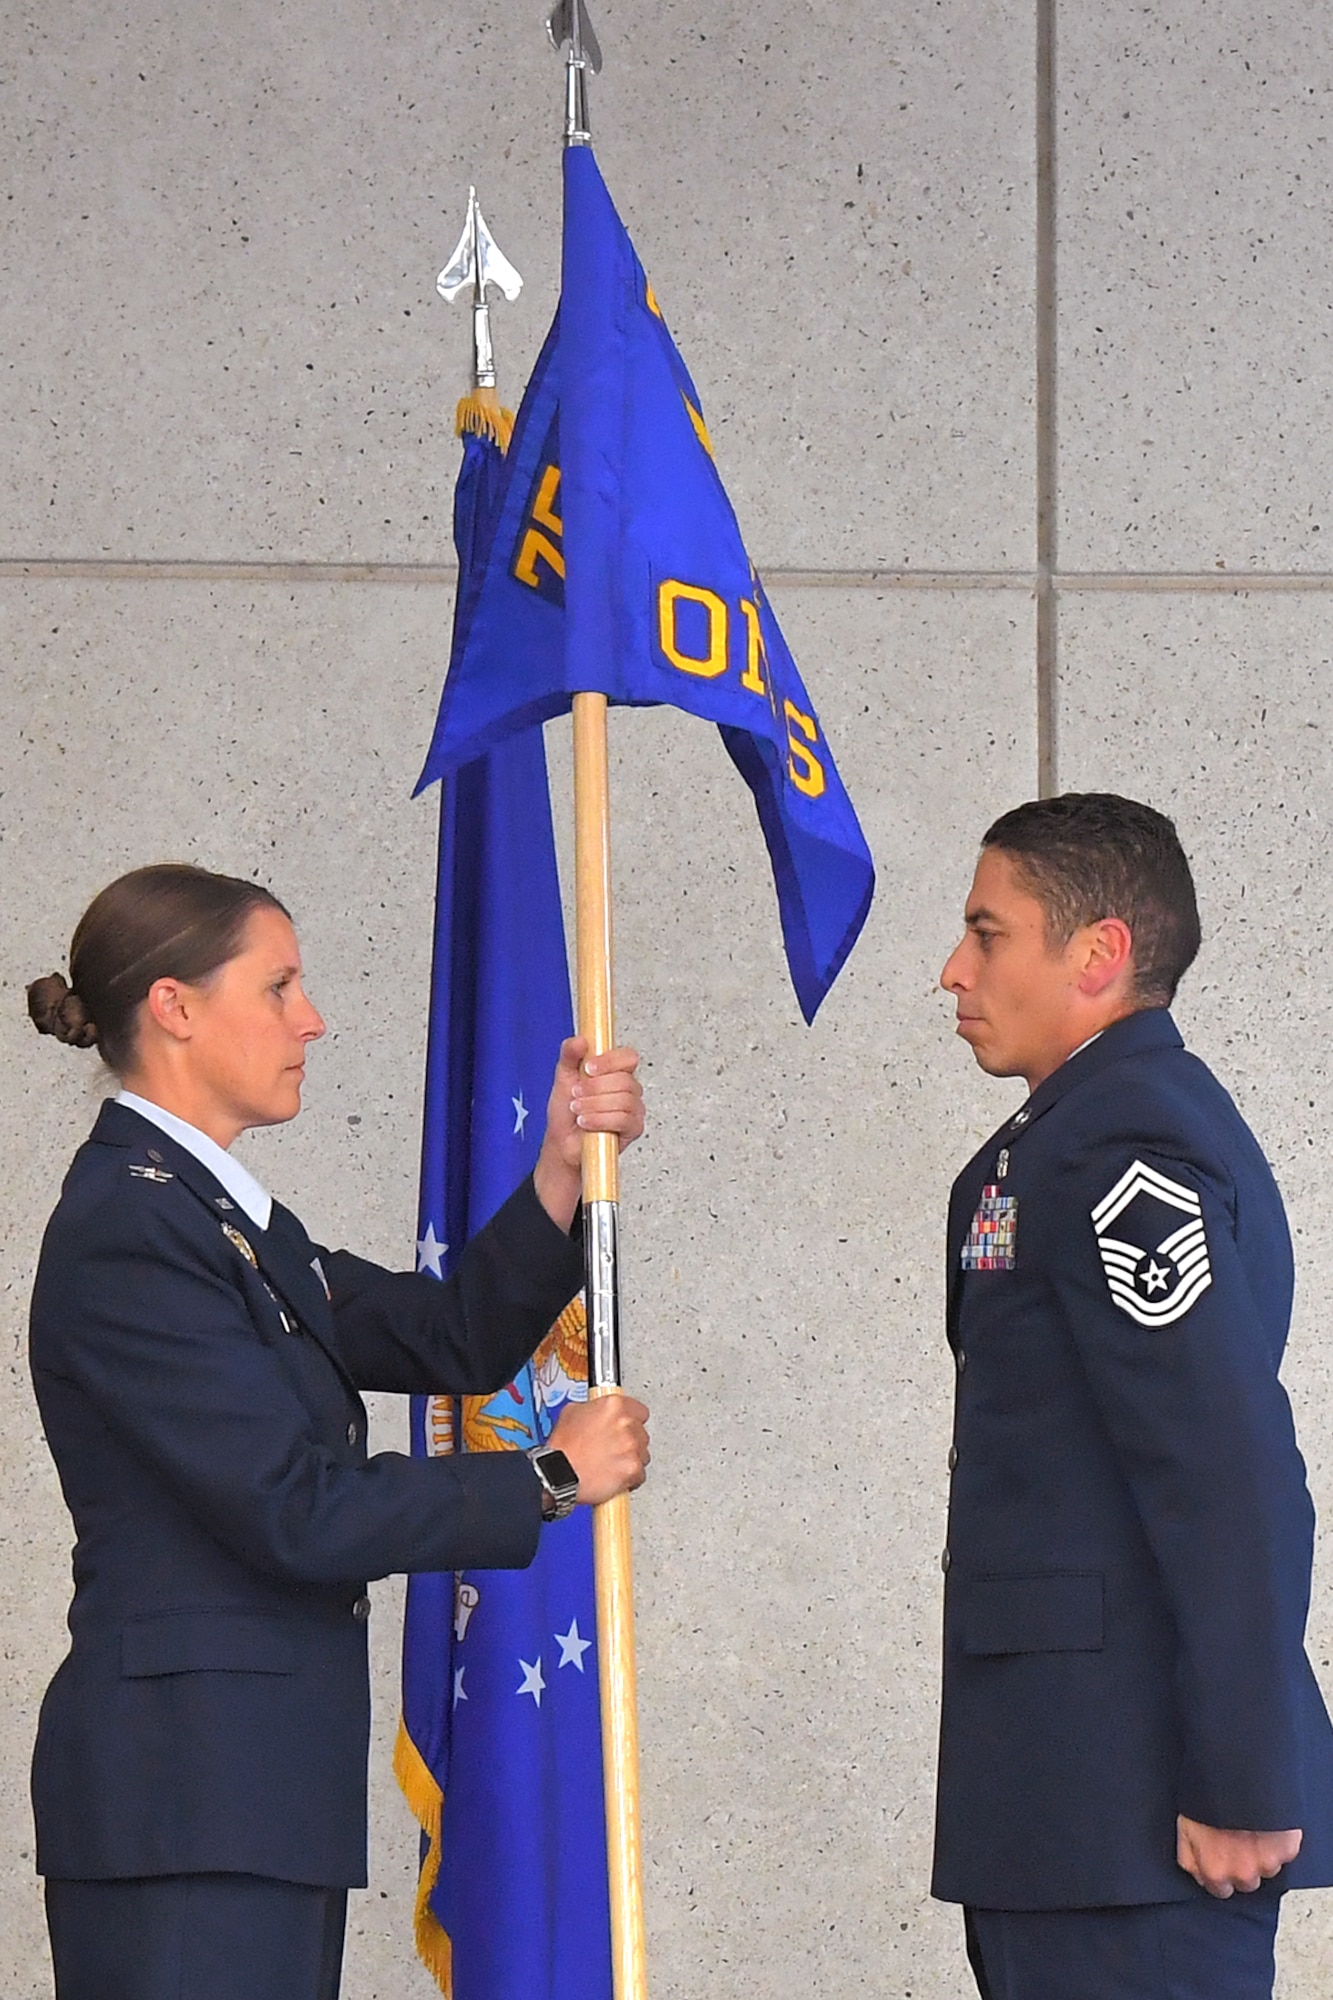 Col. Michelle Brown, 75th Operational Medical Readiness Squadron commander, receives the unit’s new guidon from Senior Master Sgt. Luis Magana, 75th OMRS superintendent, during a squadron inactivation and redesgination ceremony July 12, 2019, at Hill Air Force Base, Utah. During the ceremony, the 75th Aerospace Medicine Squadron was inactivated and then redesignated as the 75th Operational Medical Readiness Squadron. The change is part of an Air Force initiative to improve patient care and military readiness. (U.S. Air Force photo by U.S. Air Force photo by Todd Cromar)